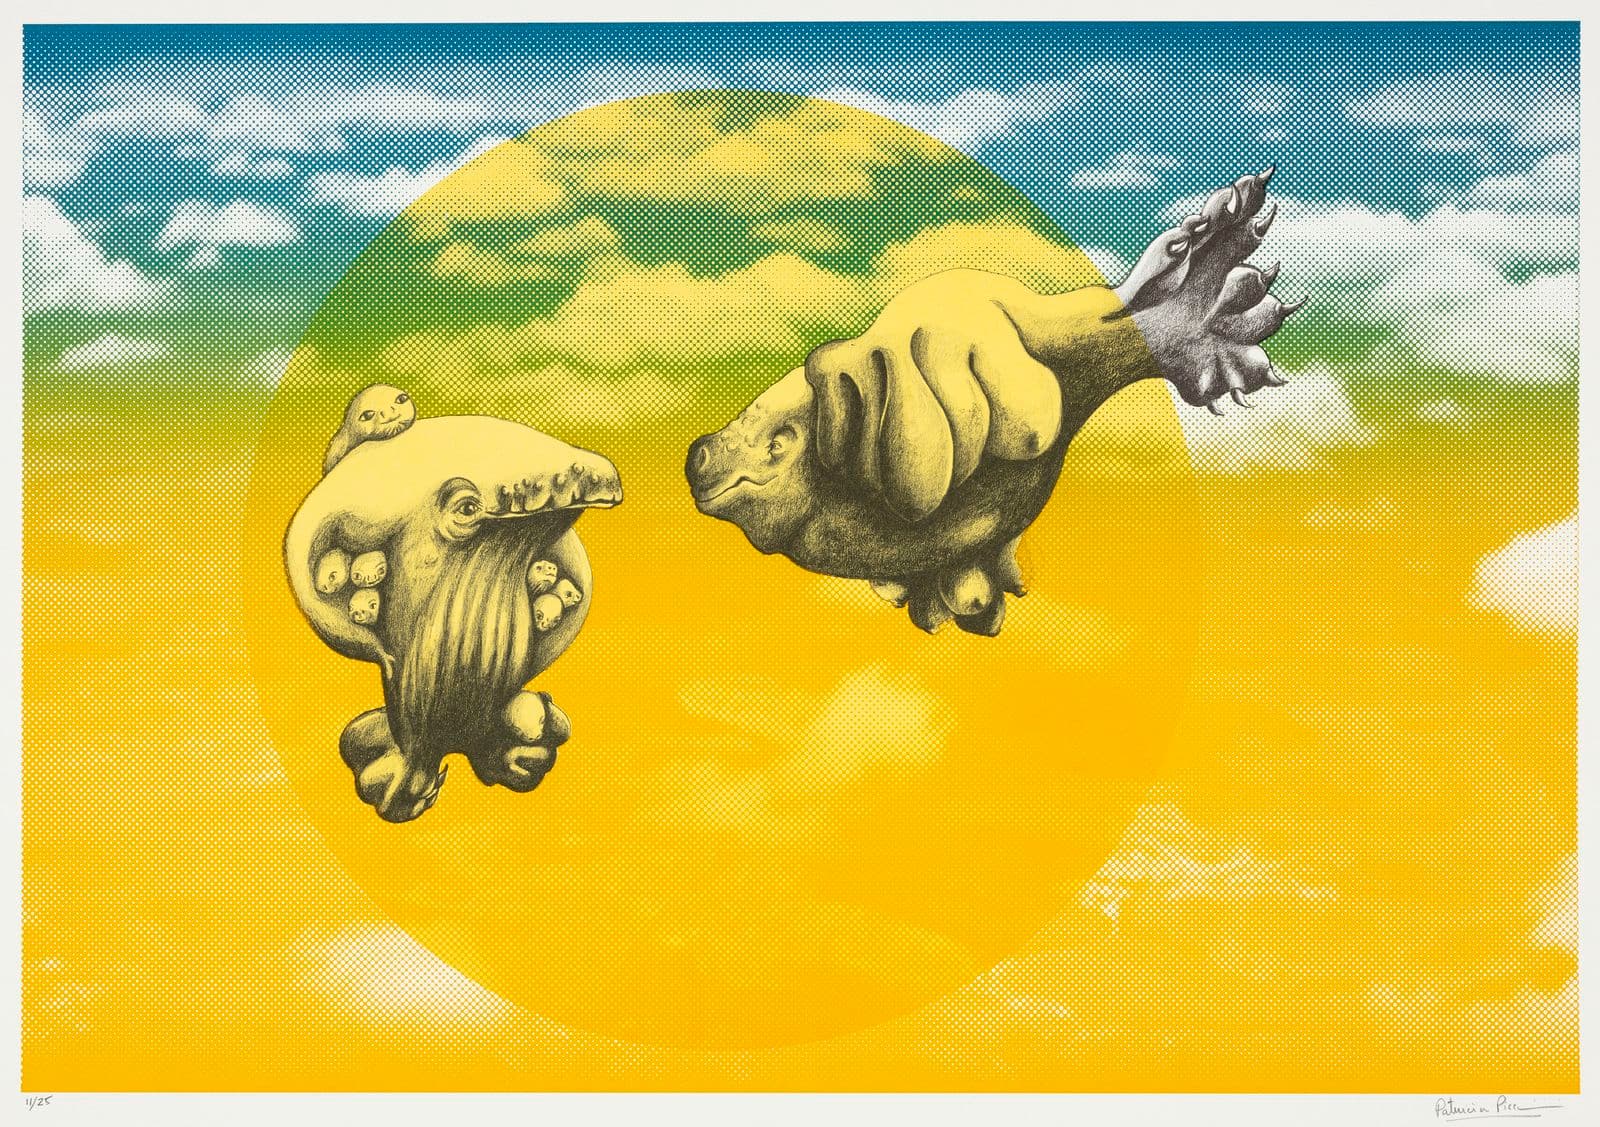 pencil drawing of two skywhale sculptures on a brightly printed background